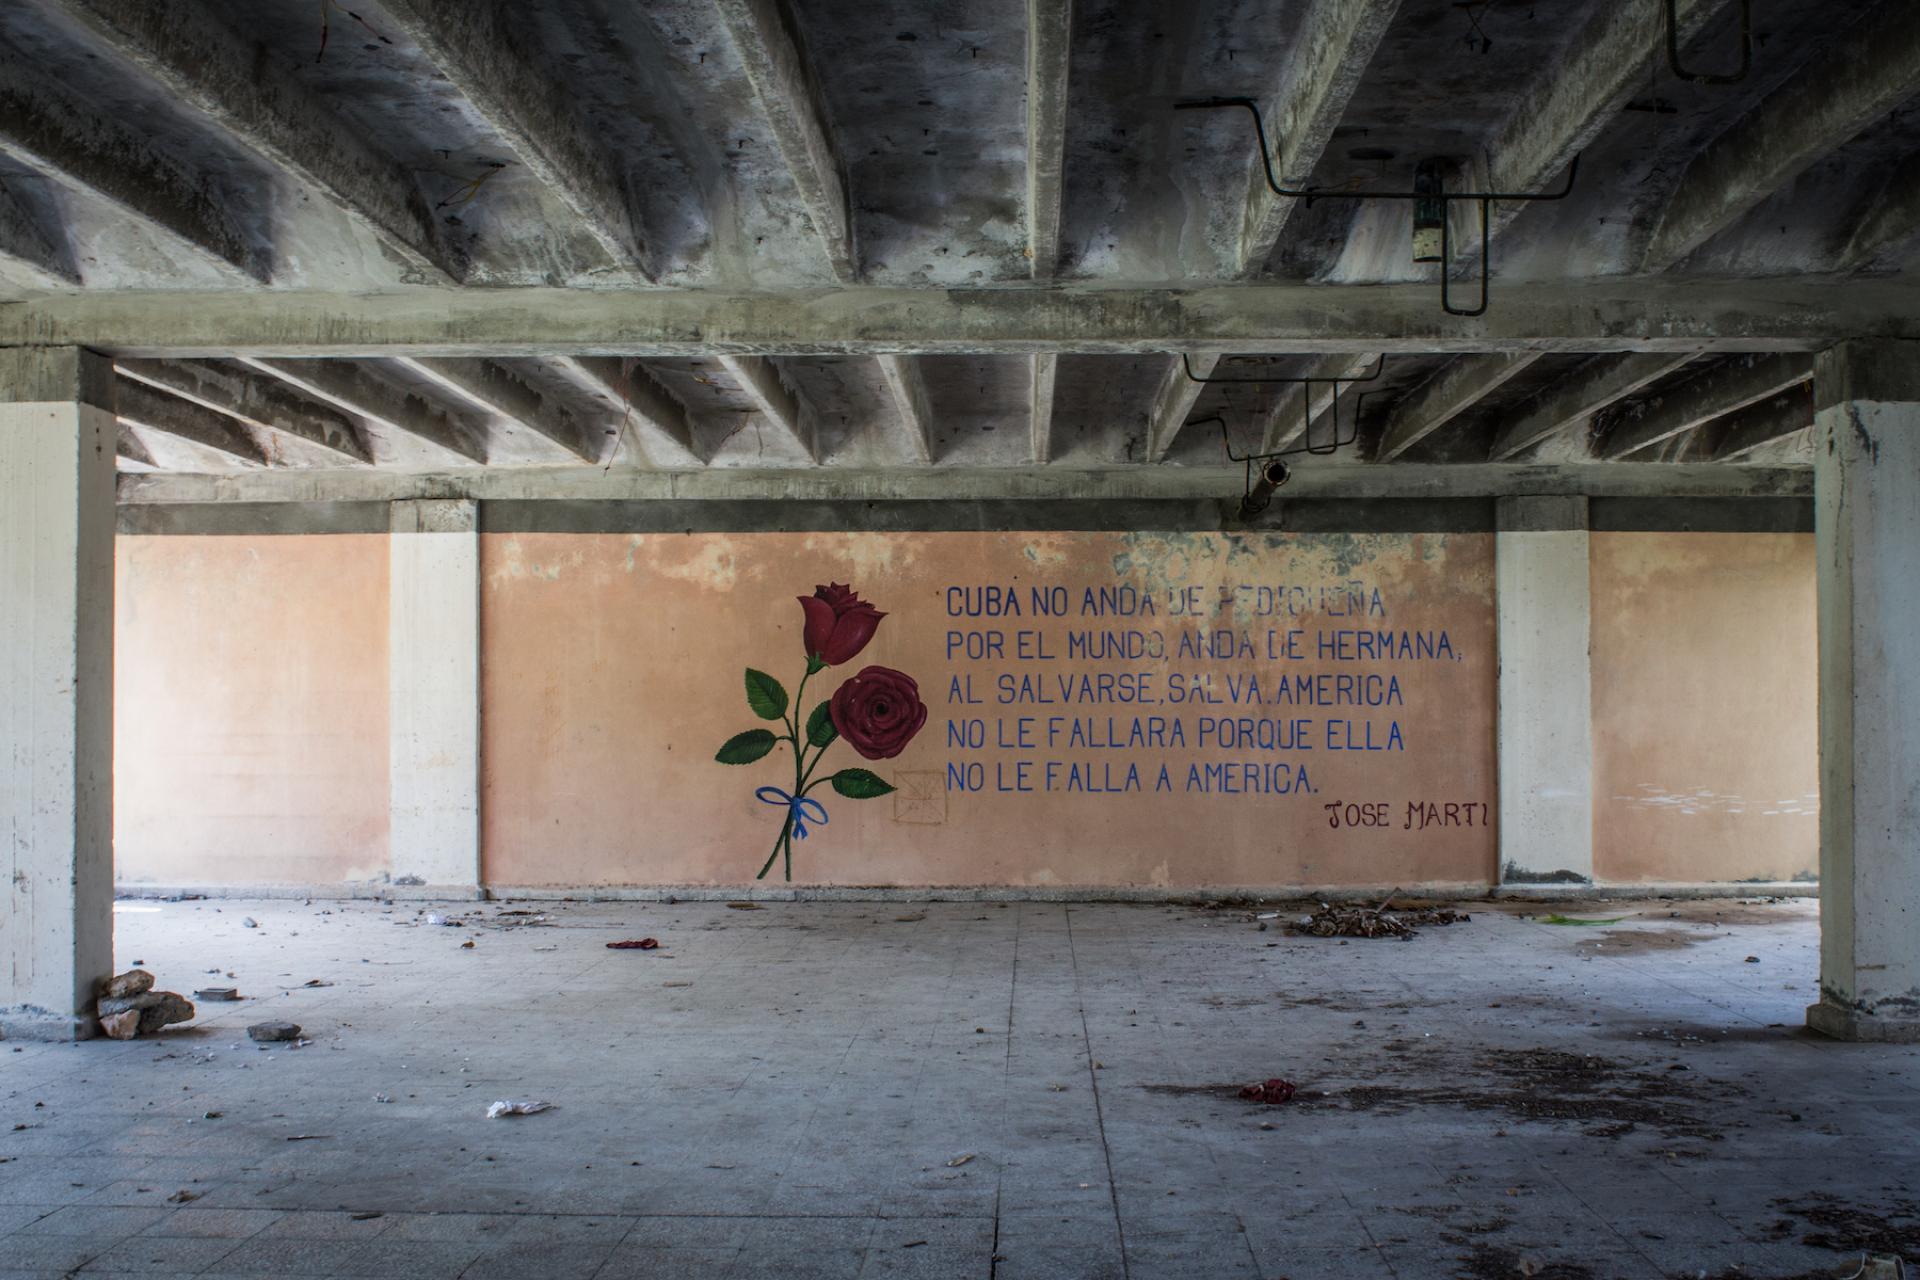 Poetry by José Martí appears on a wall in what might have been intended as a cafeteria.